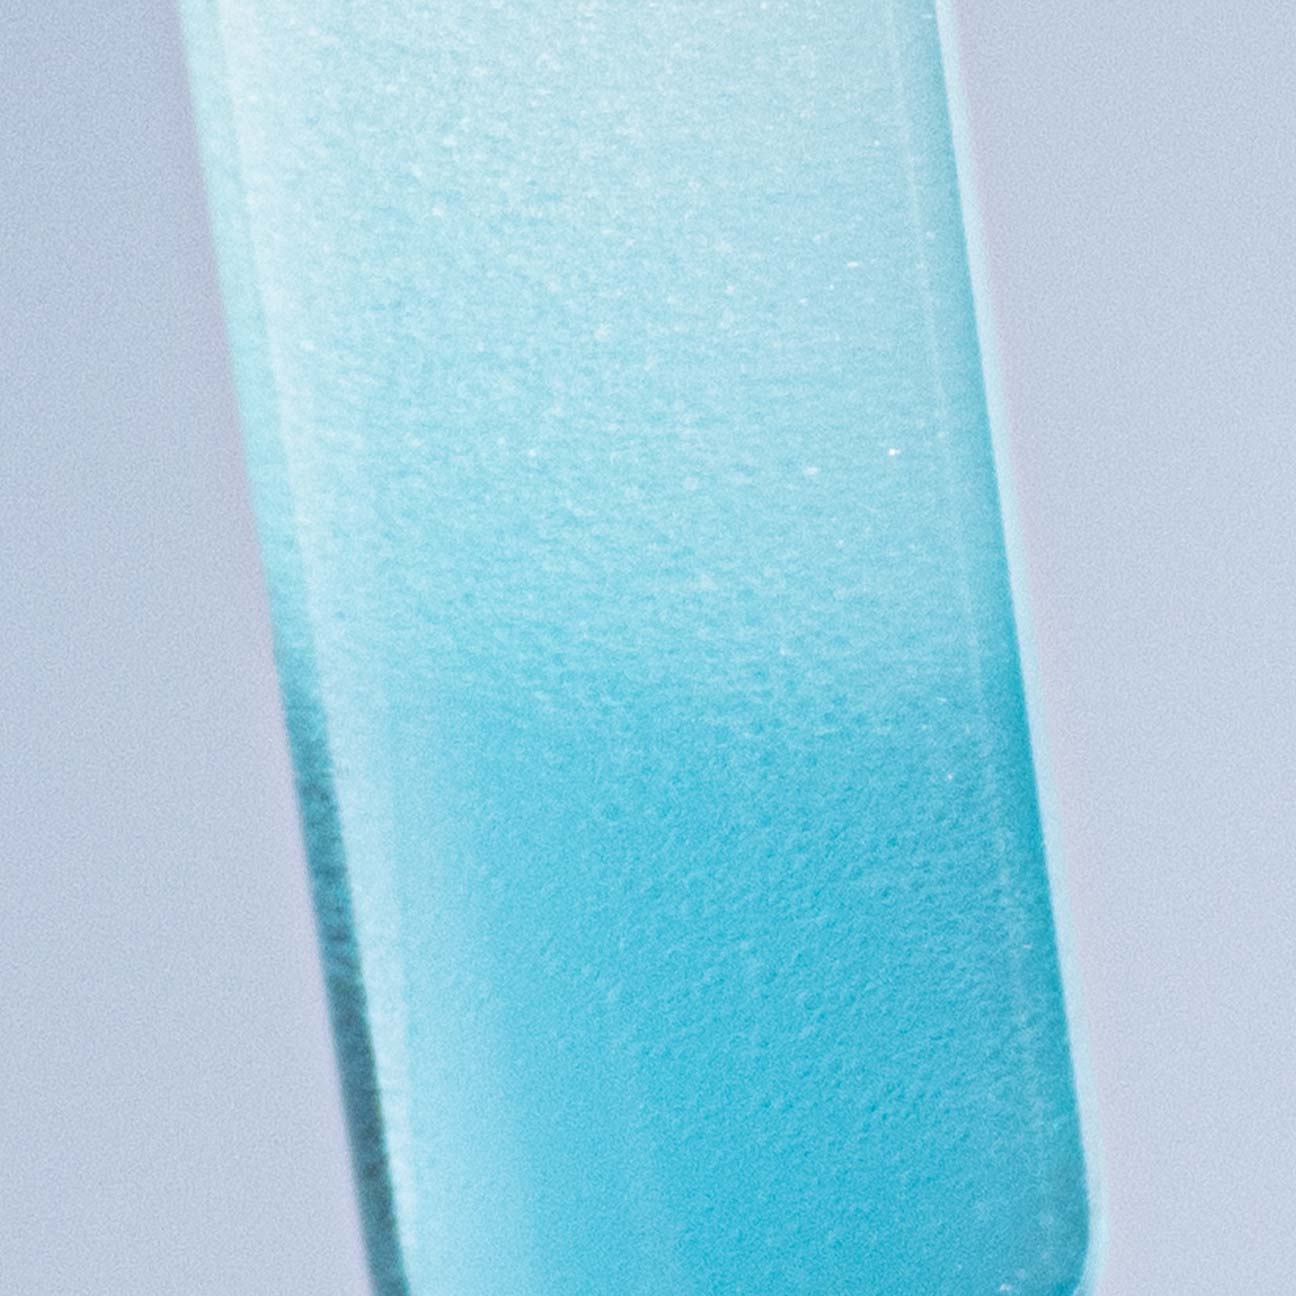 Superclean Bi Phase Cleanser image 3